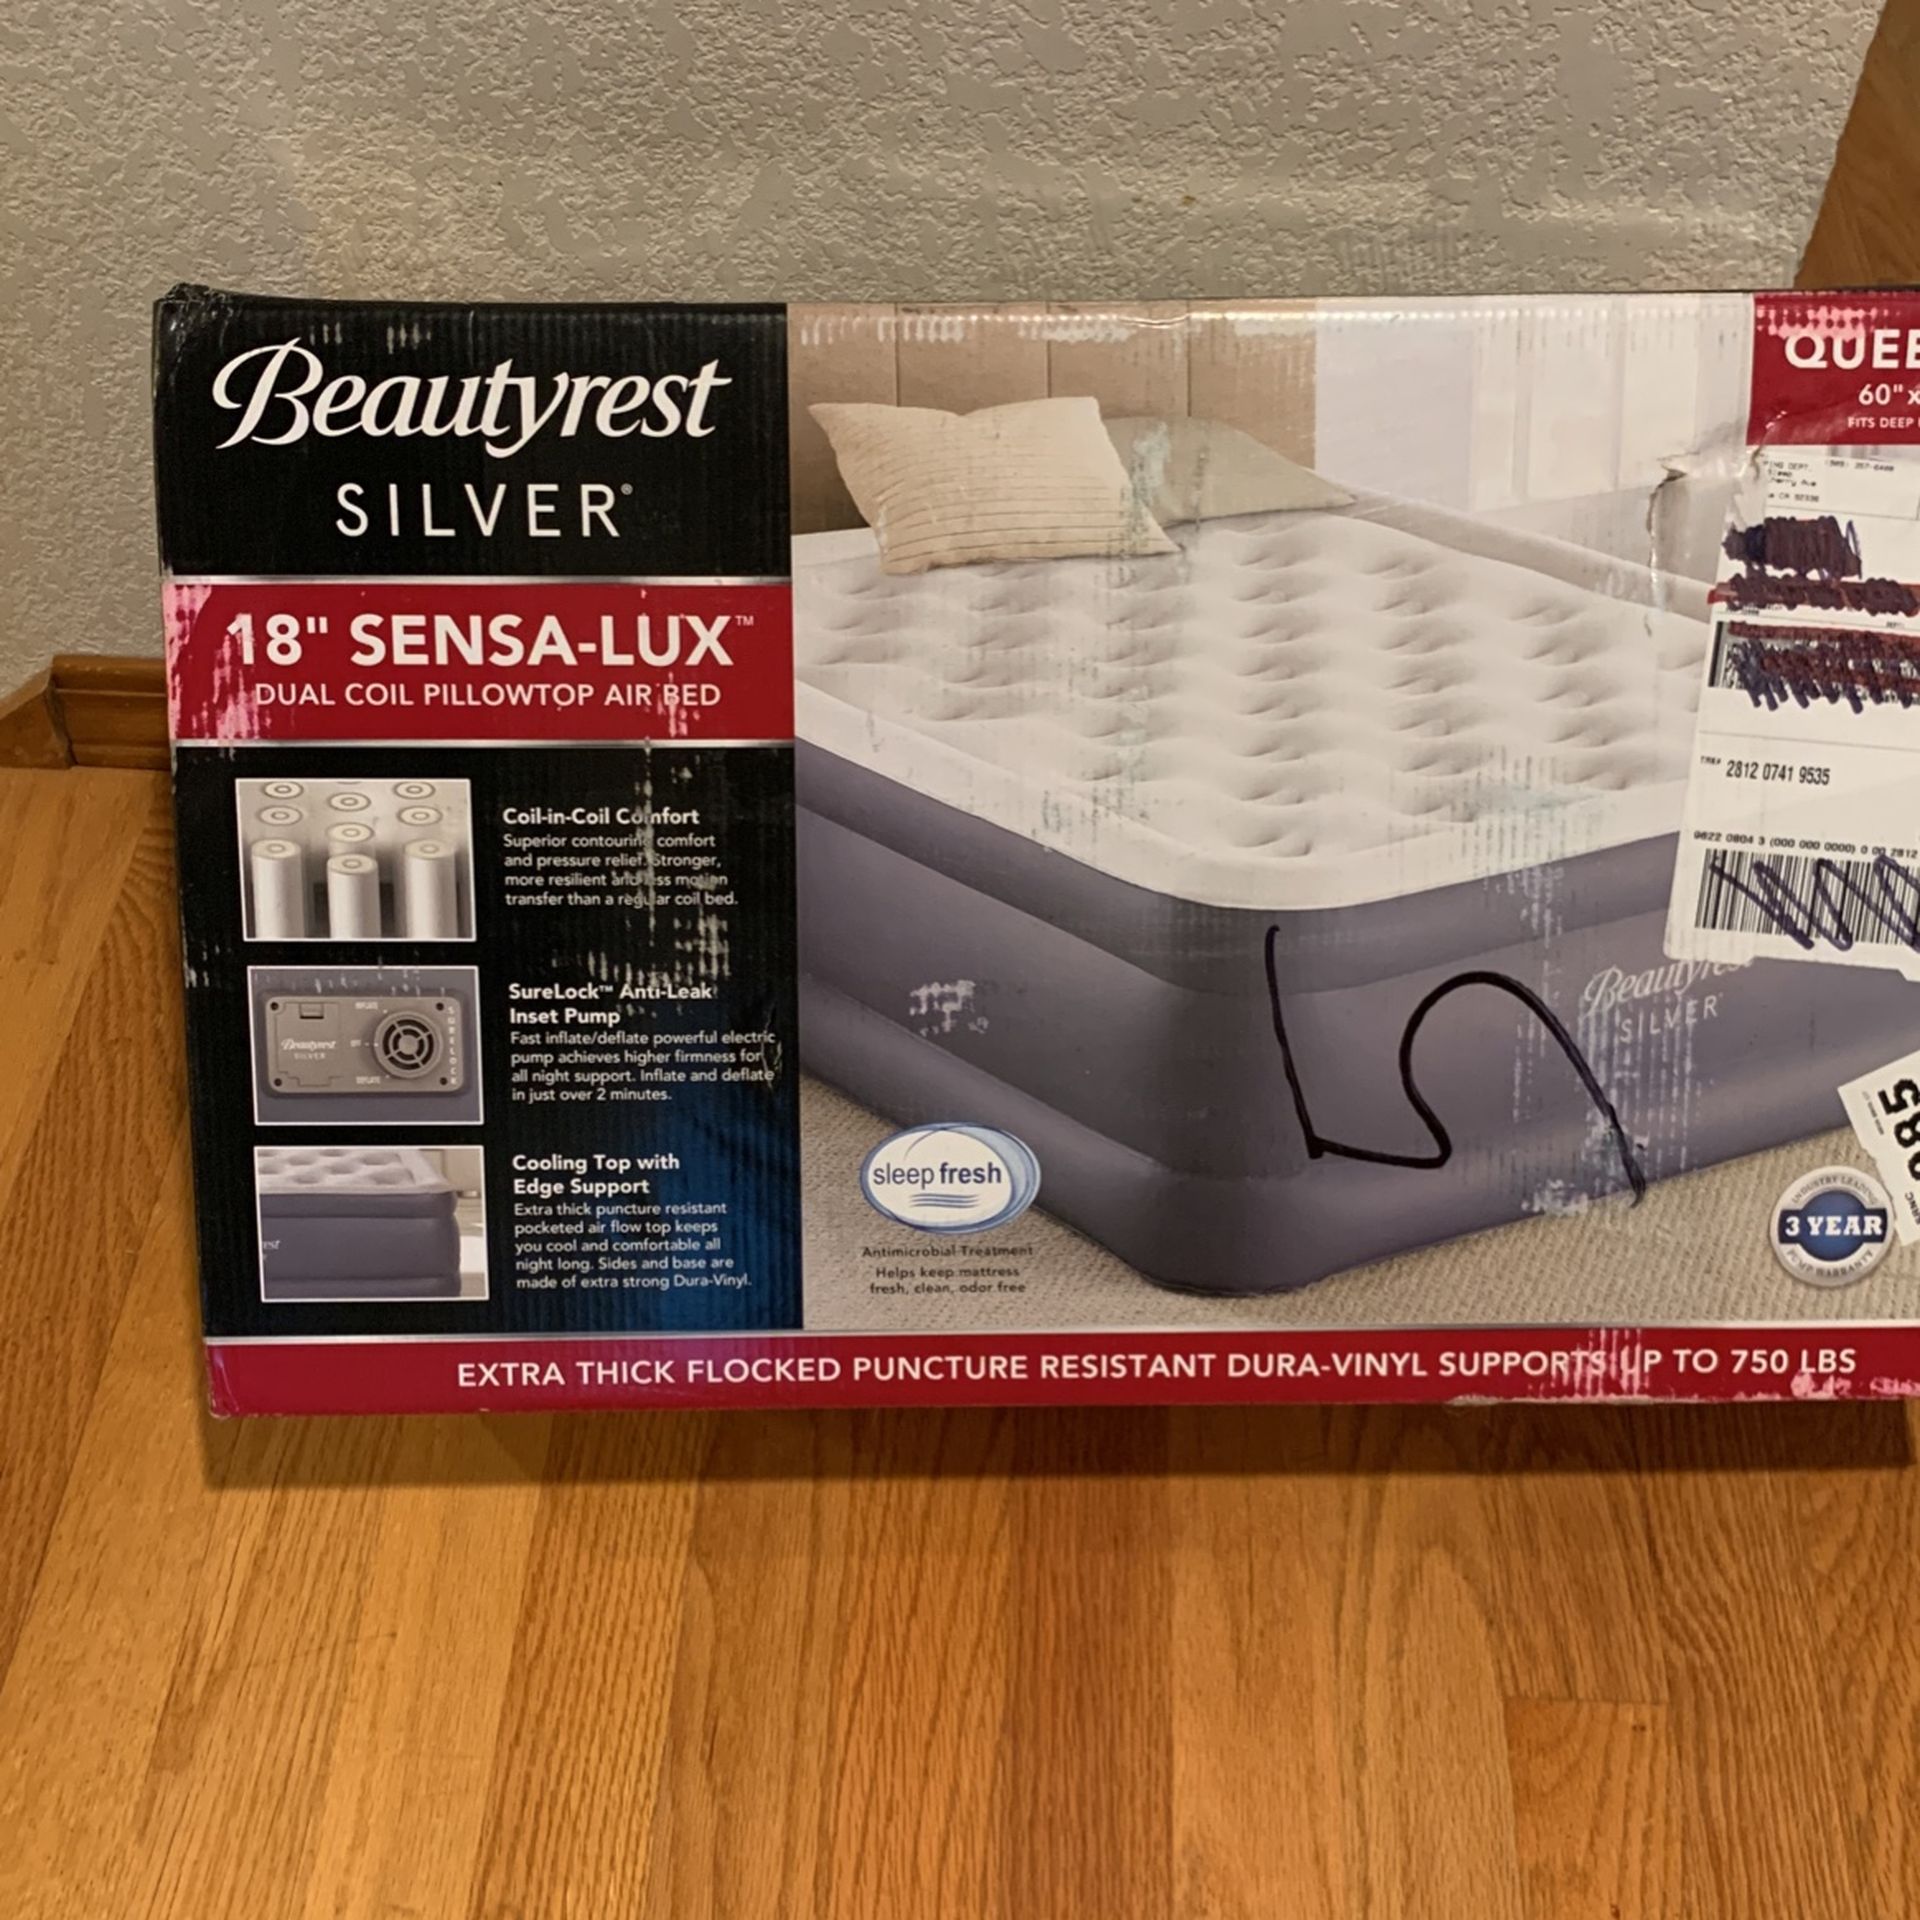 Beautyrest Silver Air Bed